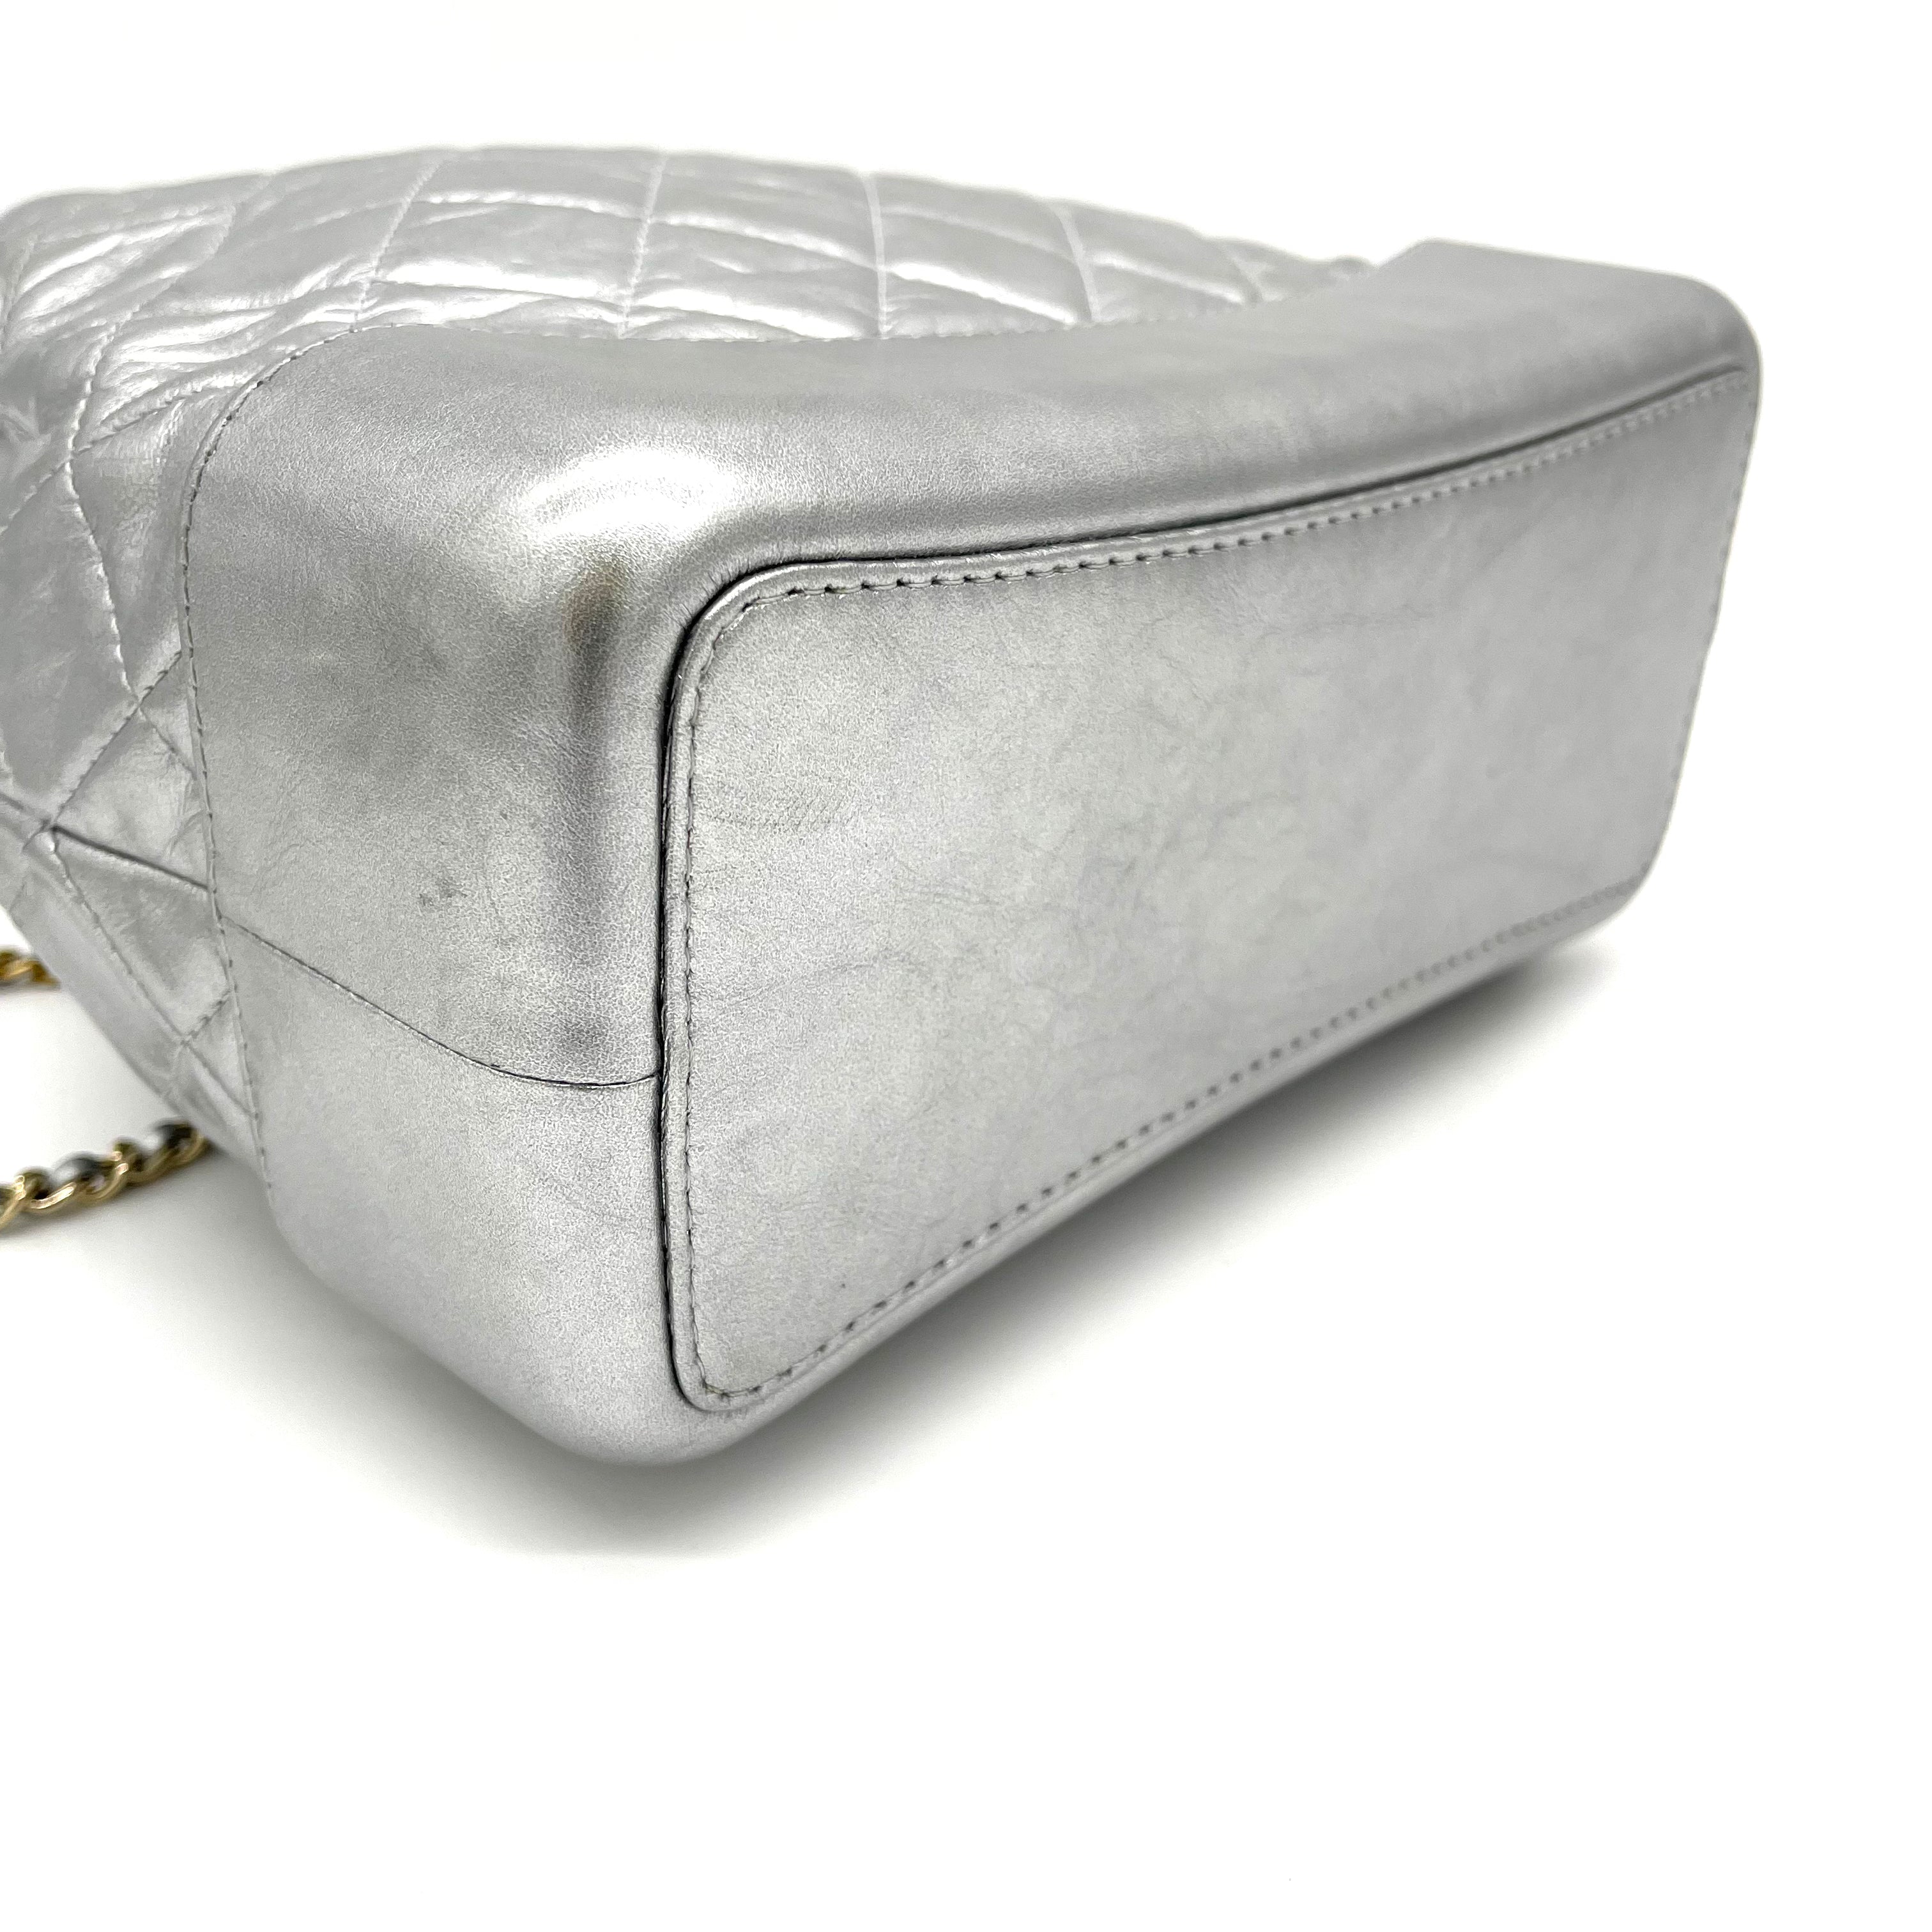 CHANEL Grey Quilted Aged Calfskin Leather Gabrielle Hobo Bag